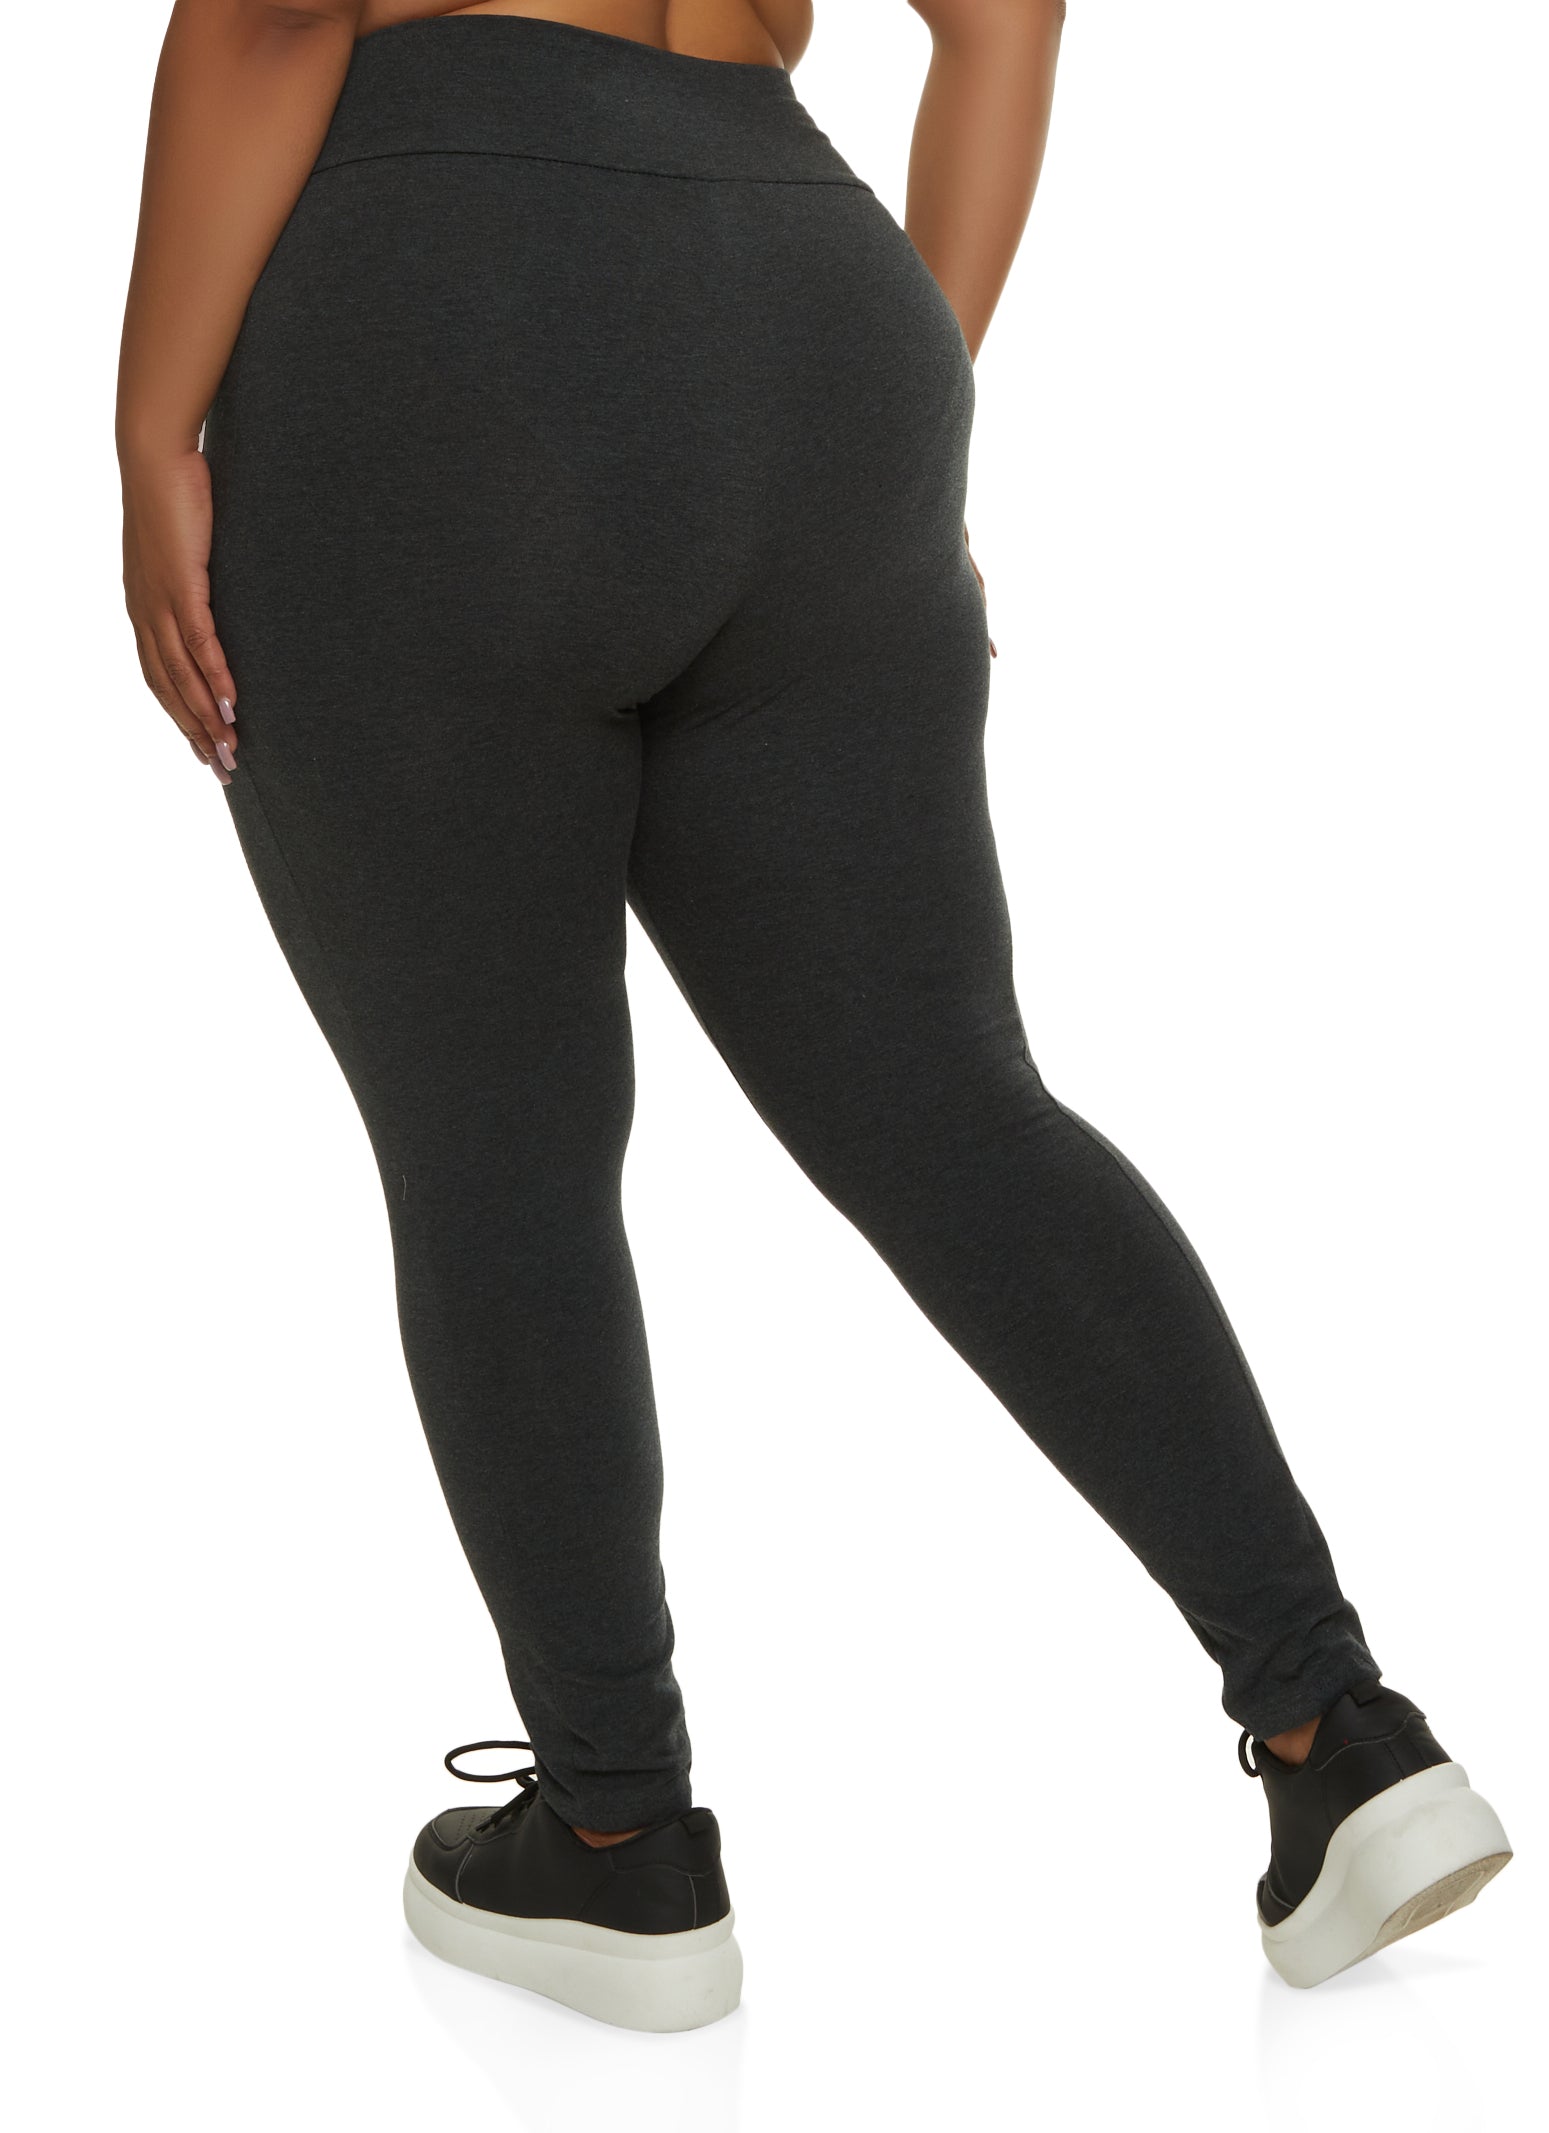 Plus Size Solid High Waist Cell Phone Pocket Leggings - Charcoal